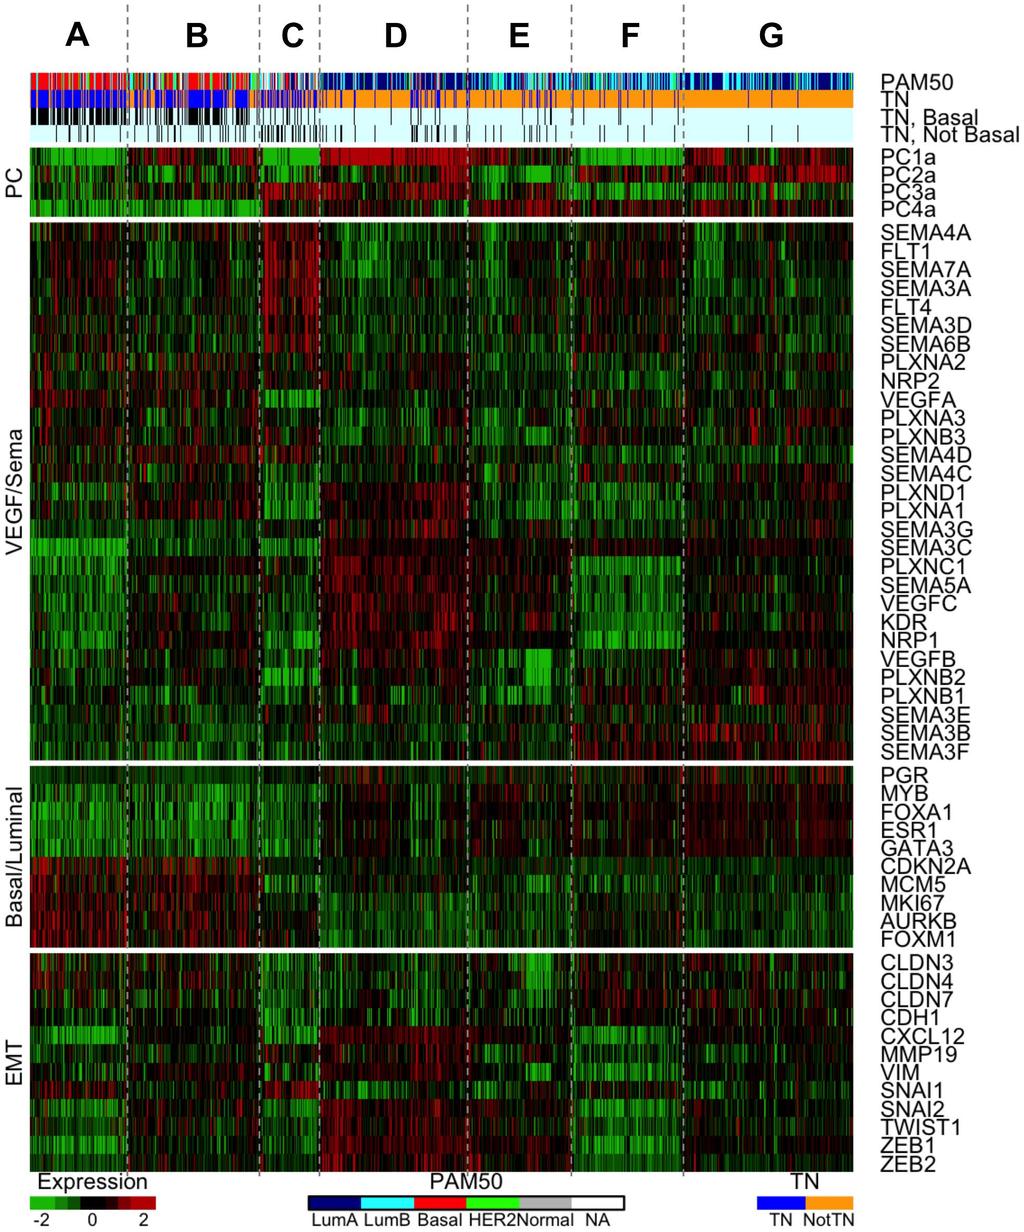 Figure 4. Heatmap of the 7 VEGF/Sema-based tumor clusters. Samples are ordered across the columns by cluster membership as determined by consensus K-means clustering.